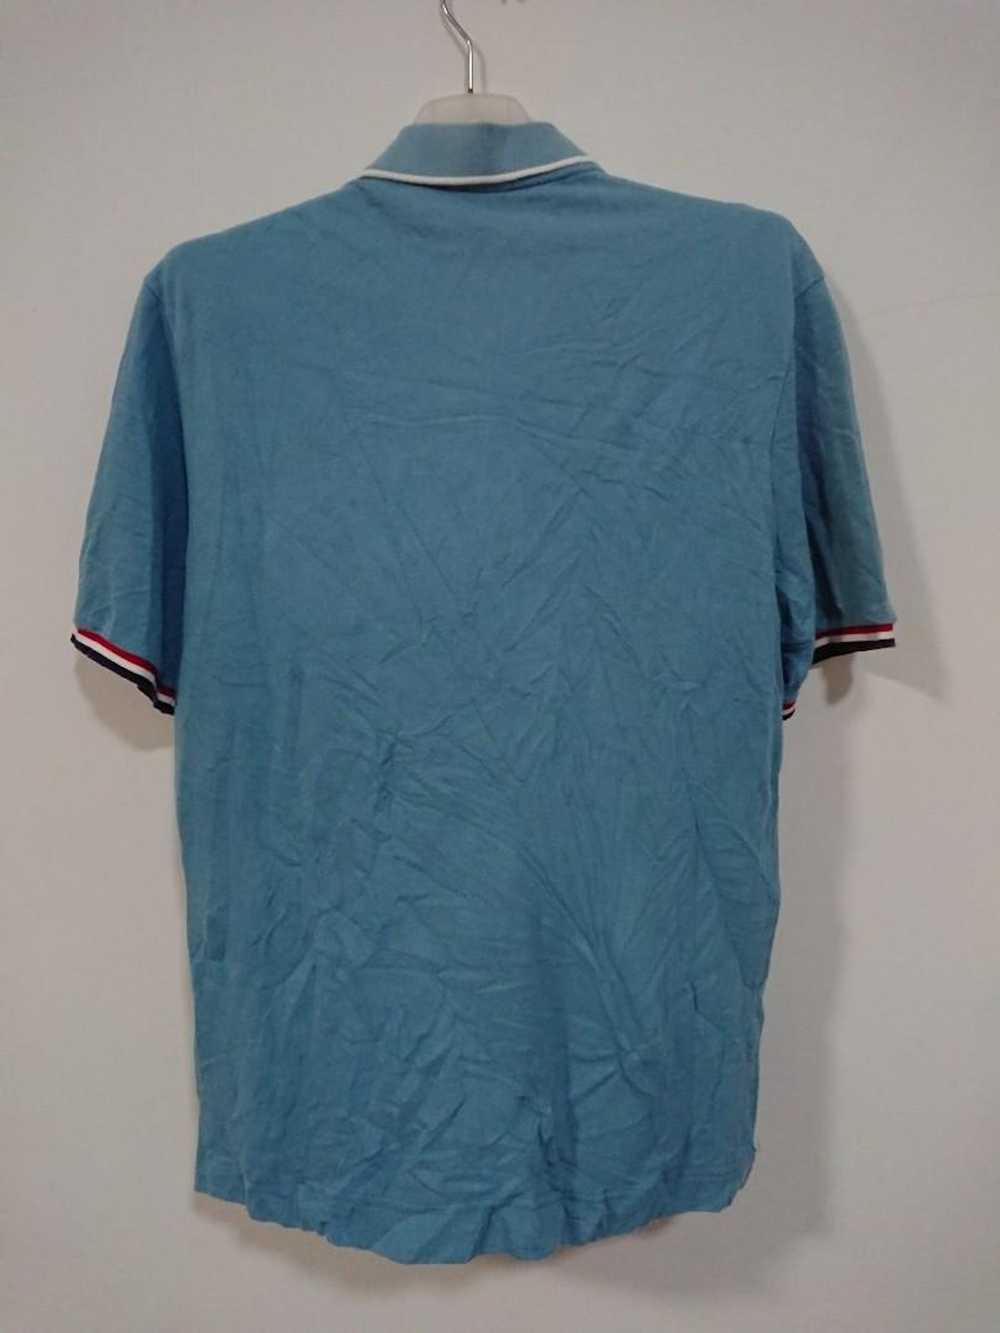 Lacoste Lacoste polos shirt size 4 - image 4